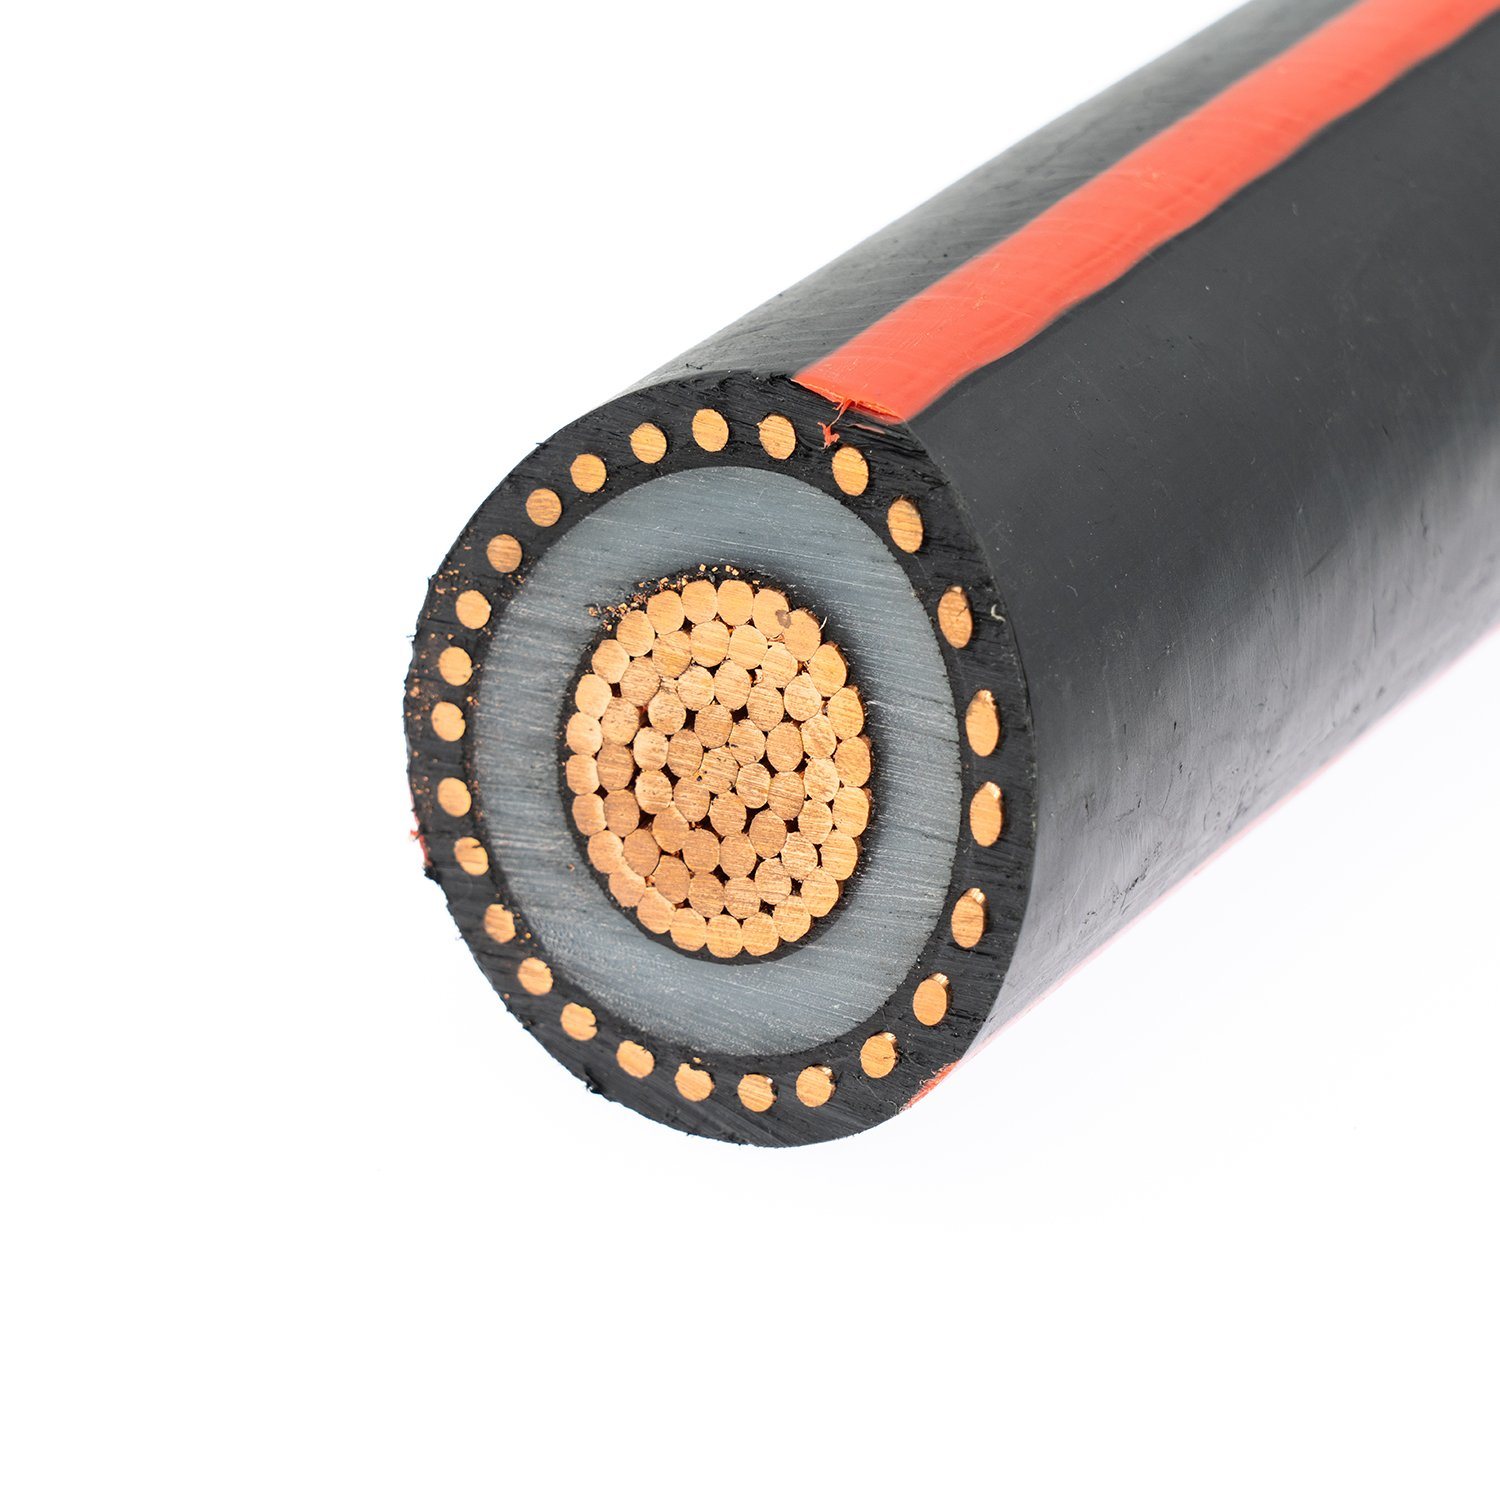 Directly Buried Epr Insulation LDPE Jacket Copper Wire Shield Urd Cable 15kv 25kv 35kv